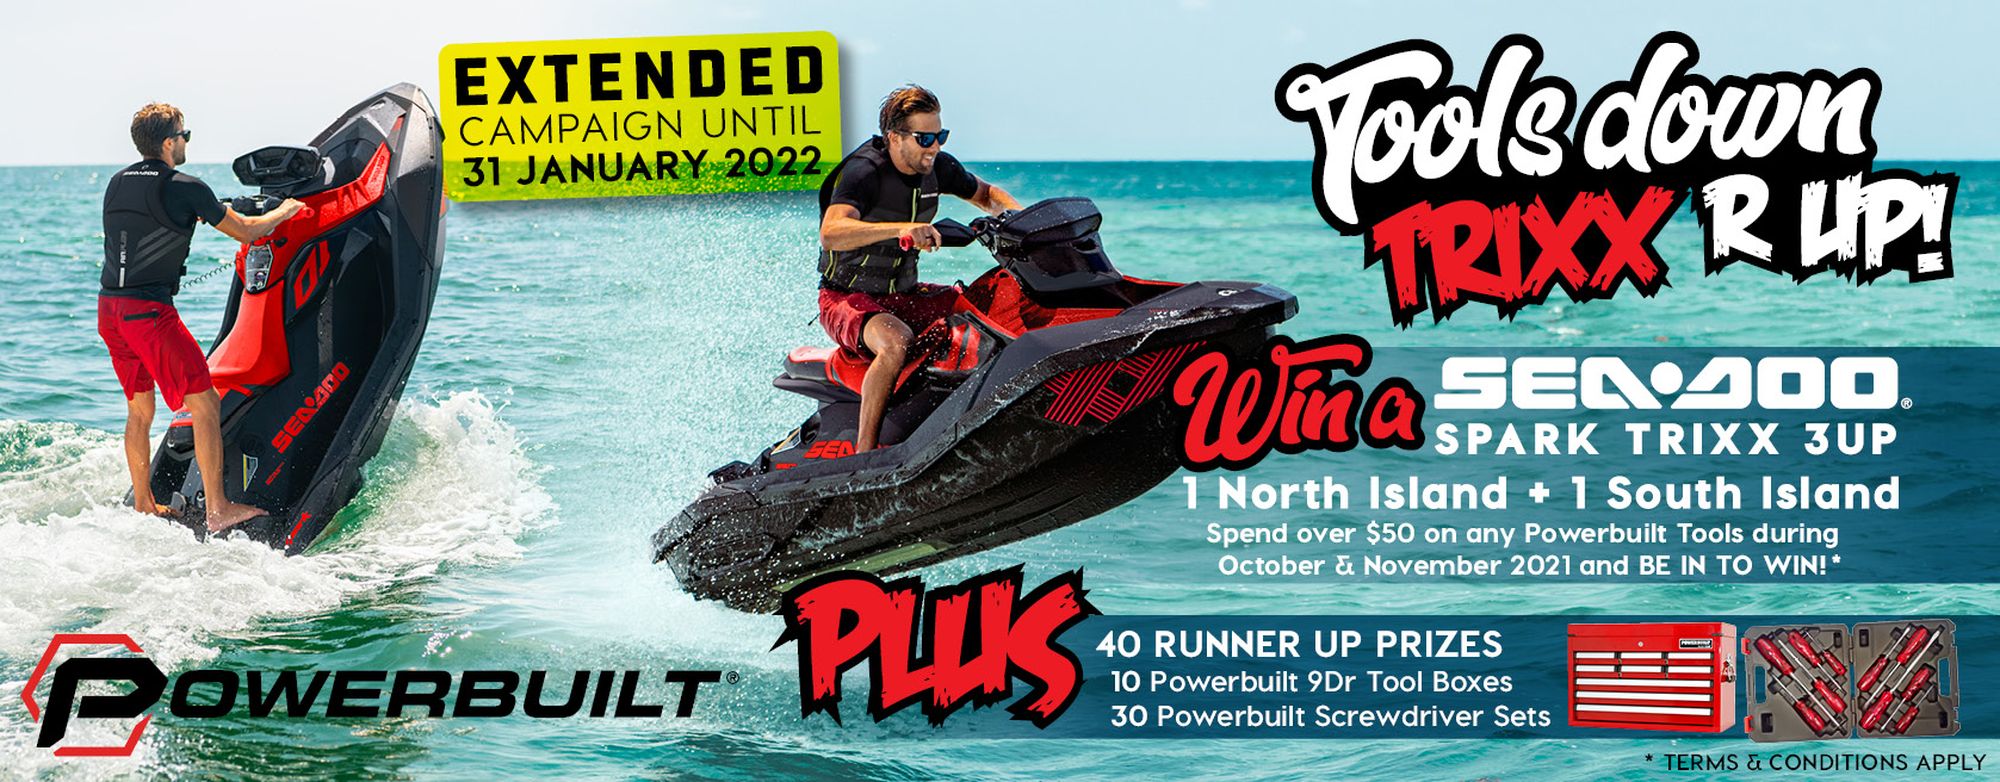 Powerbuilt tools summer promotion is here! October & November 2021 Be in to win 1 of 2 sea-doo 2021 spark trixx 3up. Spend over $50 on any powerbuilt tools during October & November 2021 and be in to win!